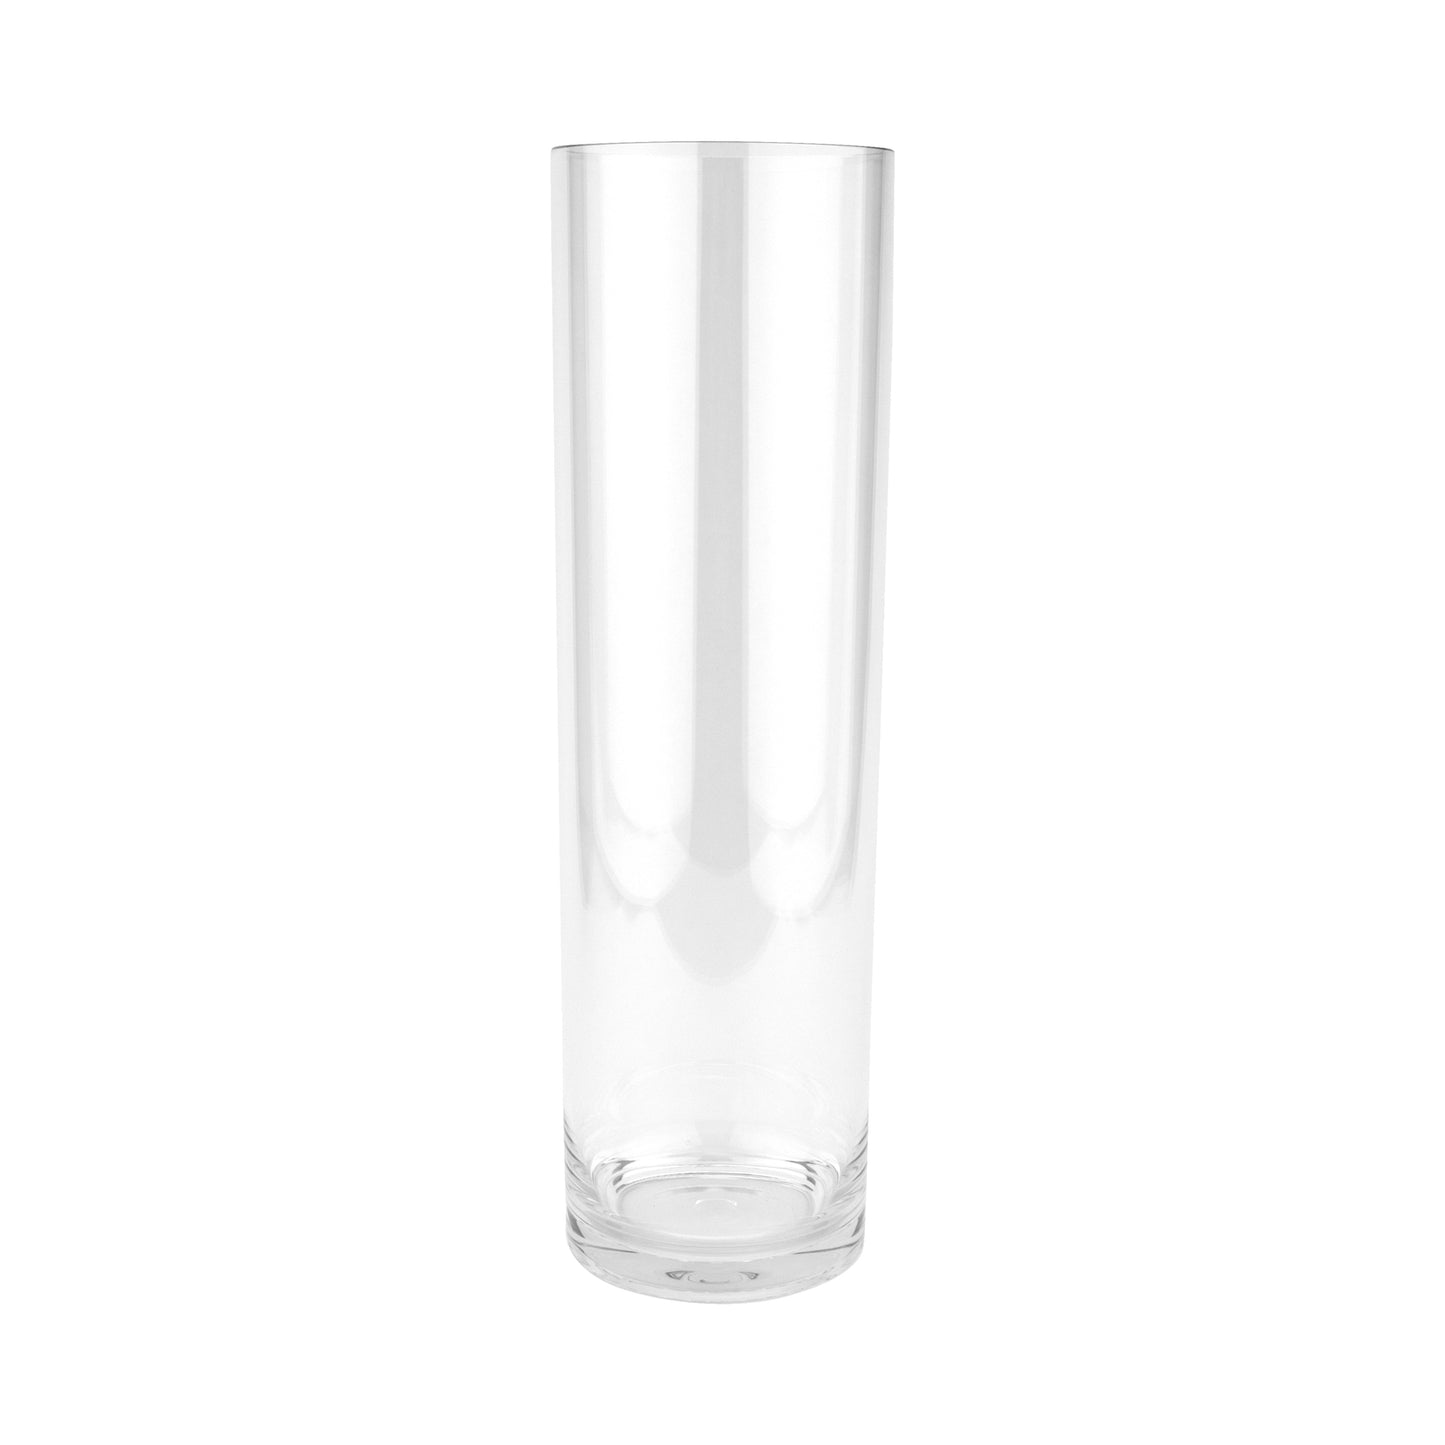 23.5" Tall, Tabletop, Display, Accent Vase, Break Resistant Plastic, 7" dia., G.E.T. Table Accessories